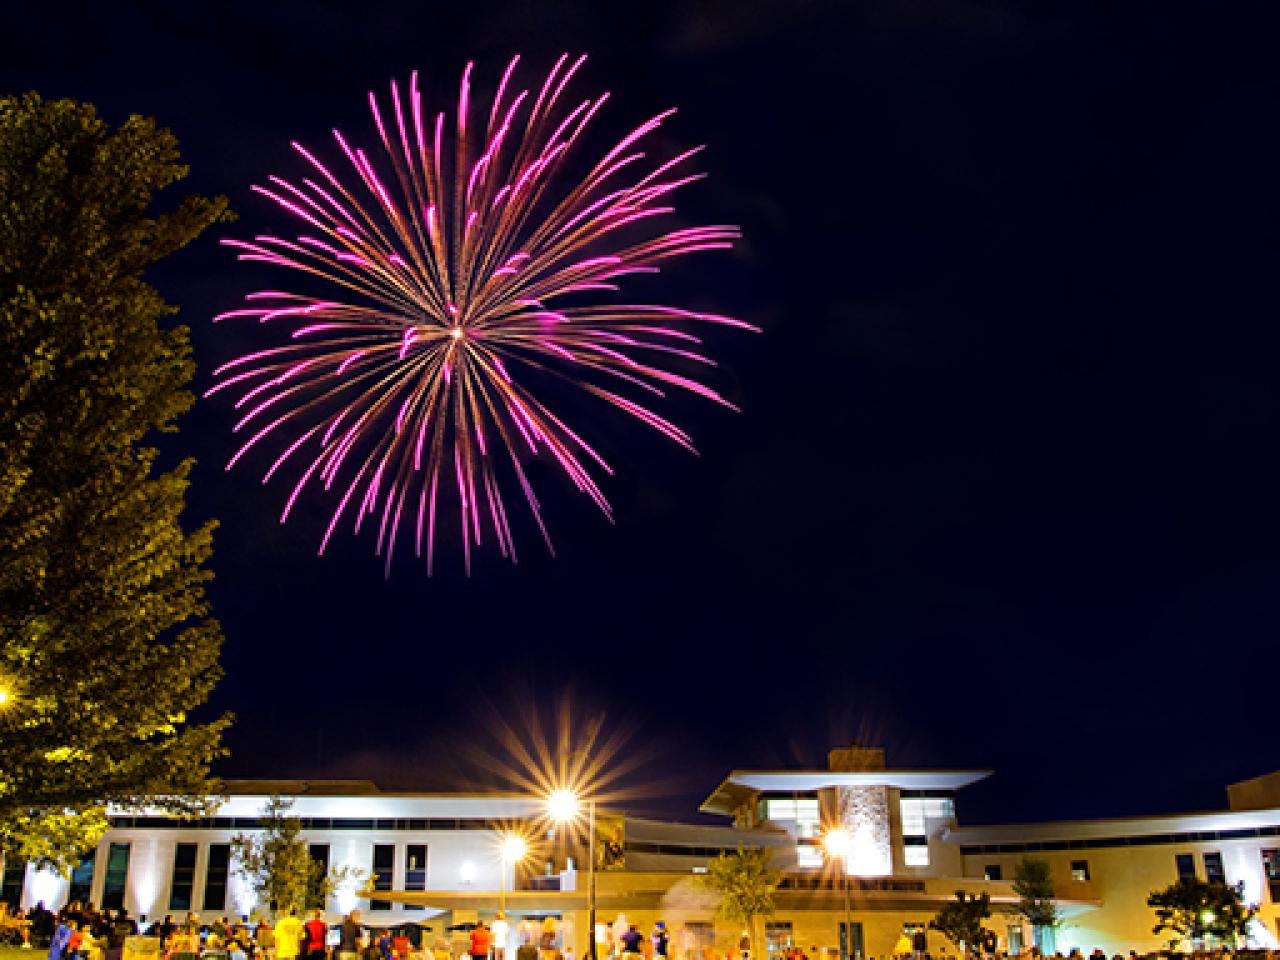 Purple and gold fireworks in the sky above the Newark Campus